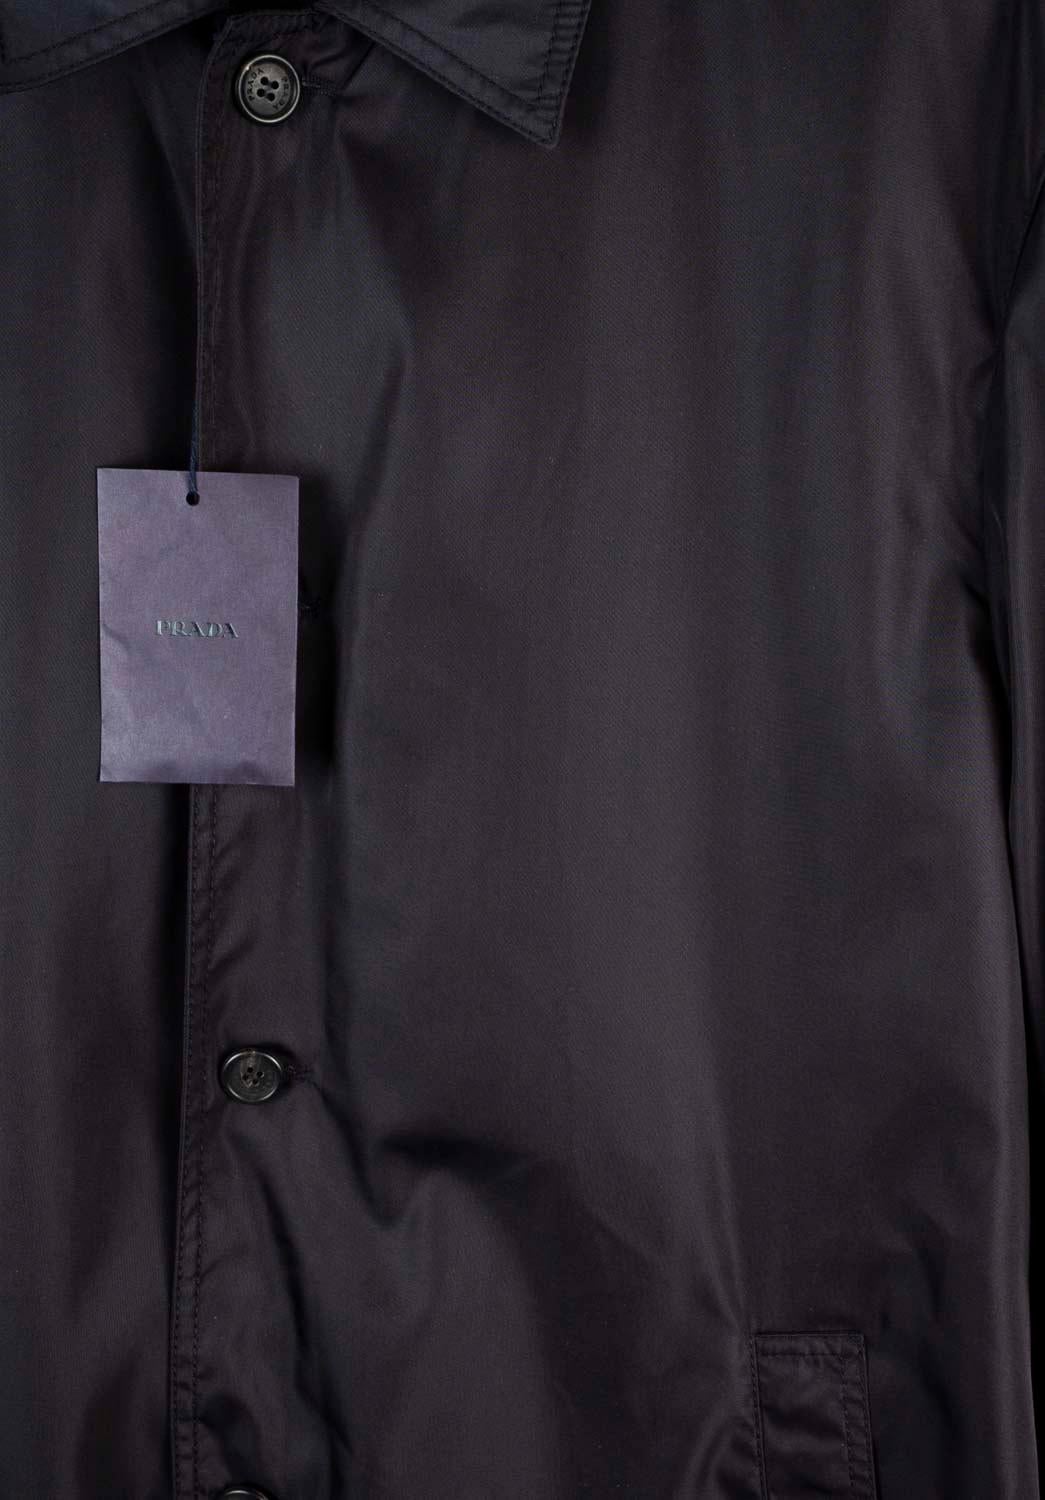 New Prada Men Classic Raincoat Nylon Long Jacket Size XL, S569 In New Condition For Sale In Kaunas, LT